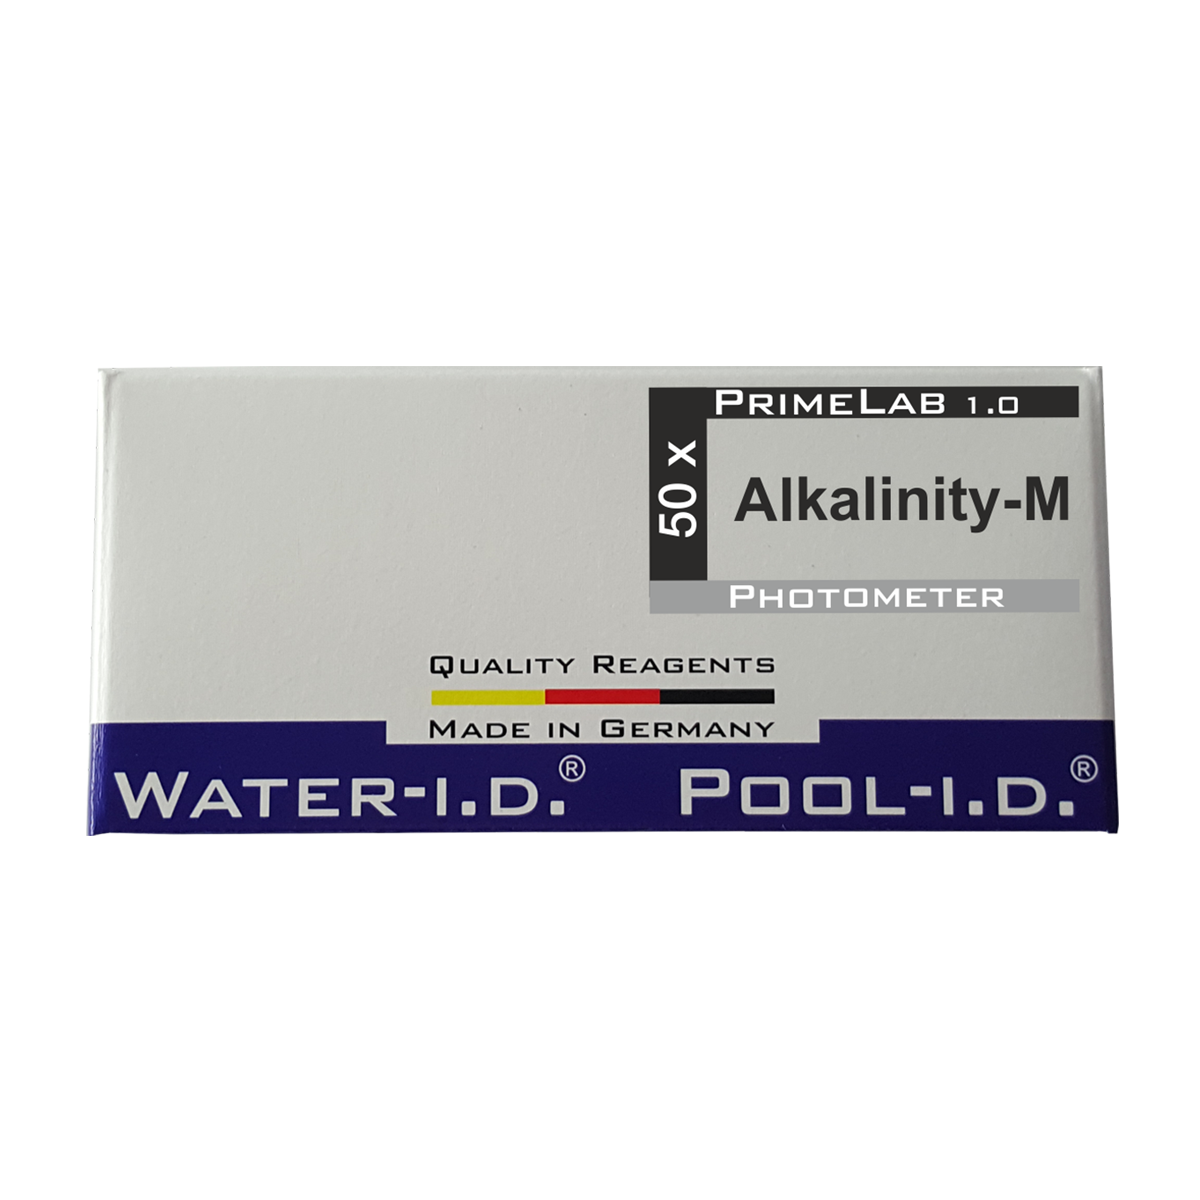 Alkalinity-M Tablets for Smart Pool Lab 1.0 Photometer unit = 50 pcs Alkalinity-M Tablets for Smart Pool Lab 1.0 Photometer unit = 50 pcs